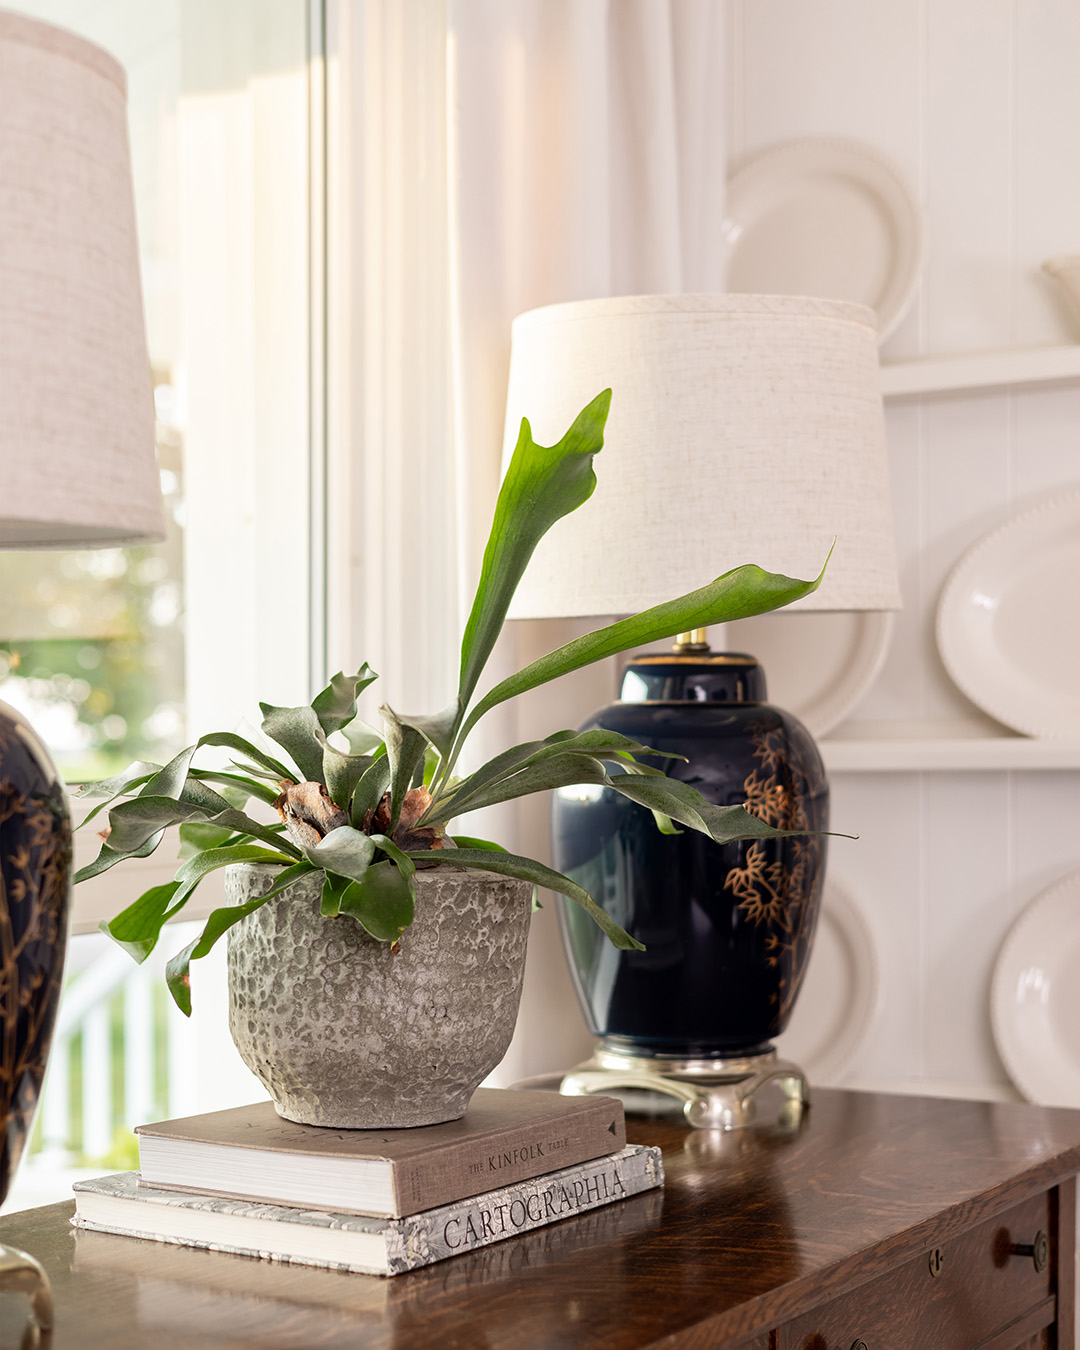 Navy blue chinoiserie lamps, plate wall, and staghorn fern.